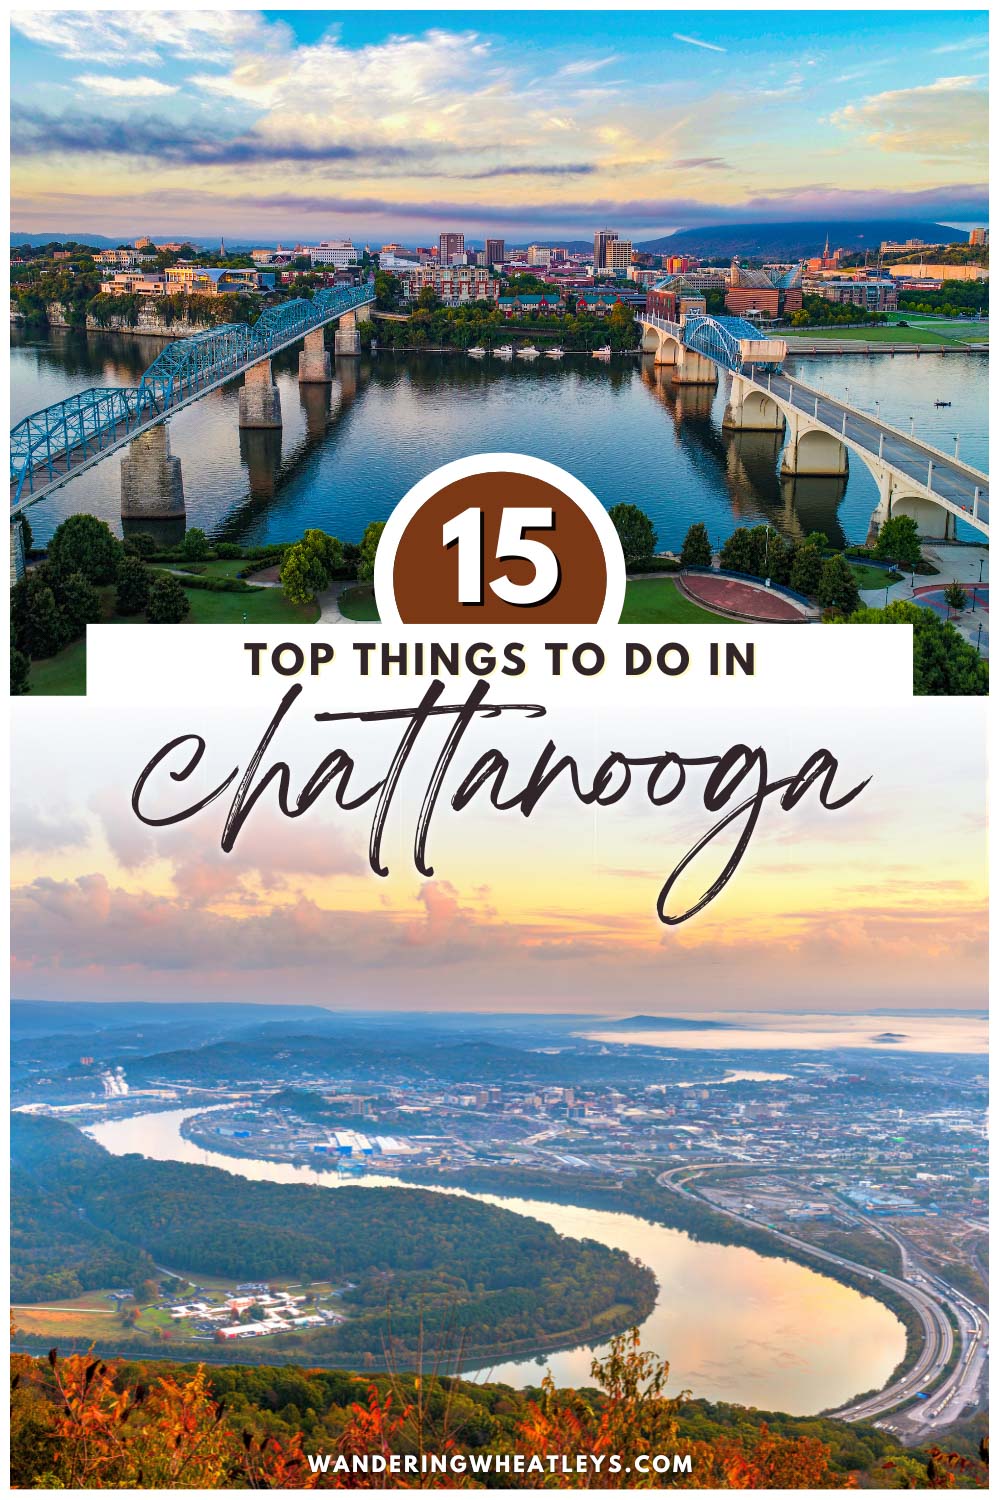 Best Things to do in Chattanooga, Tennessee